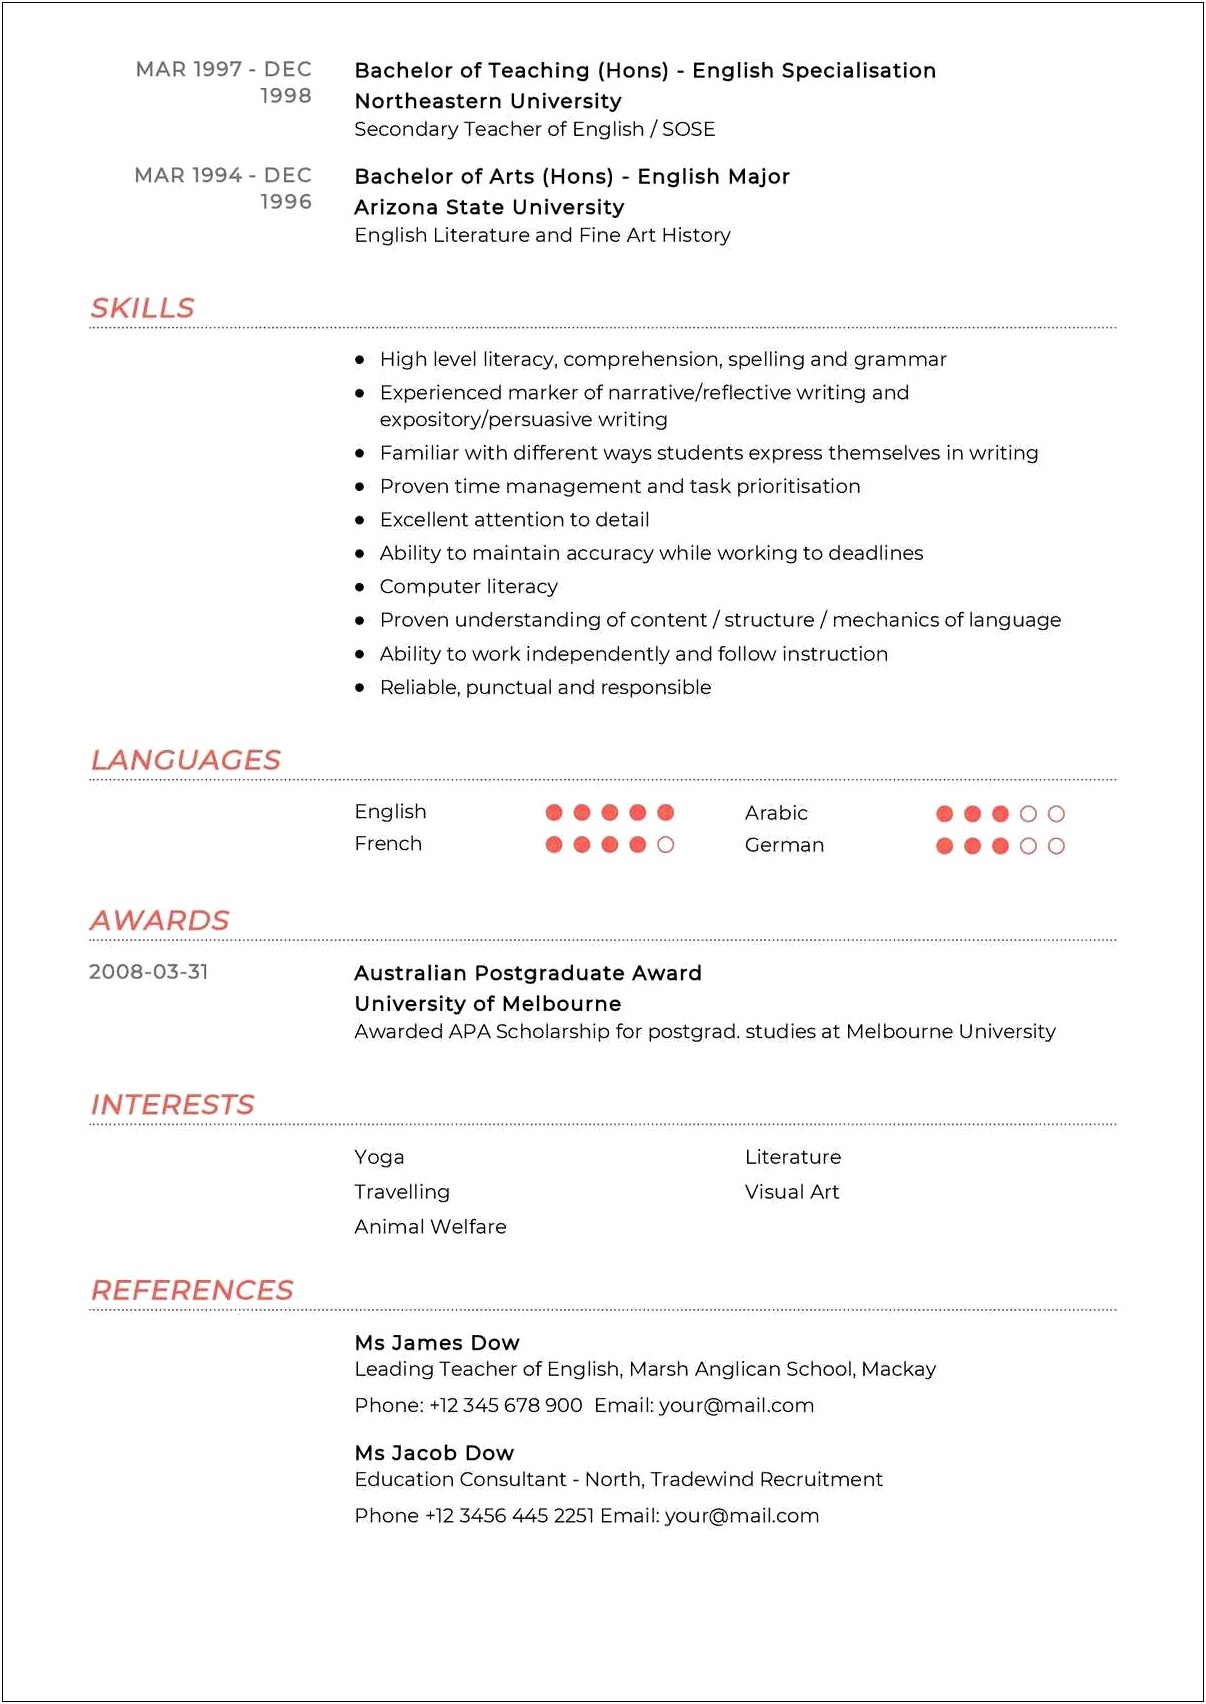 Ability To Work Independently On Resume